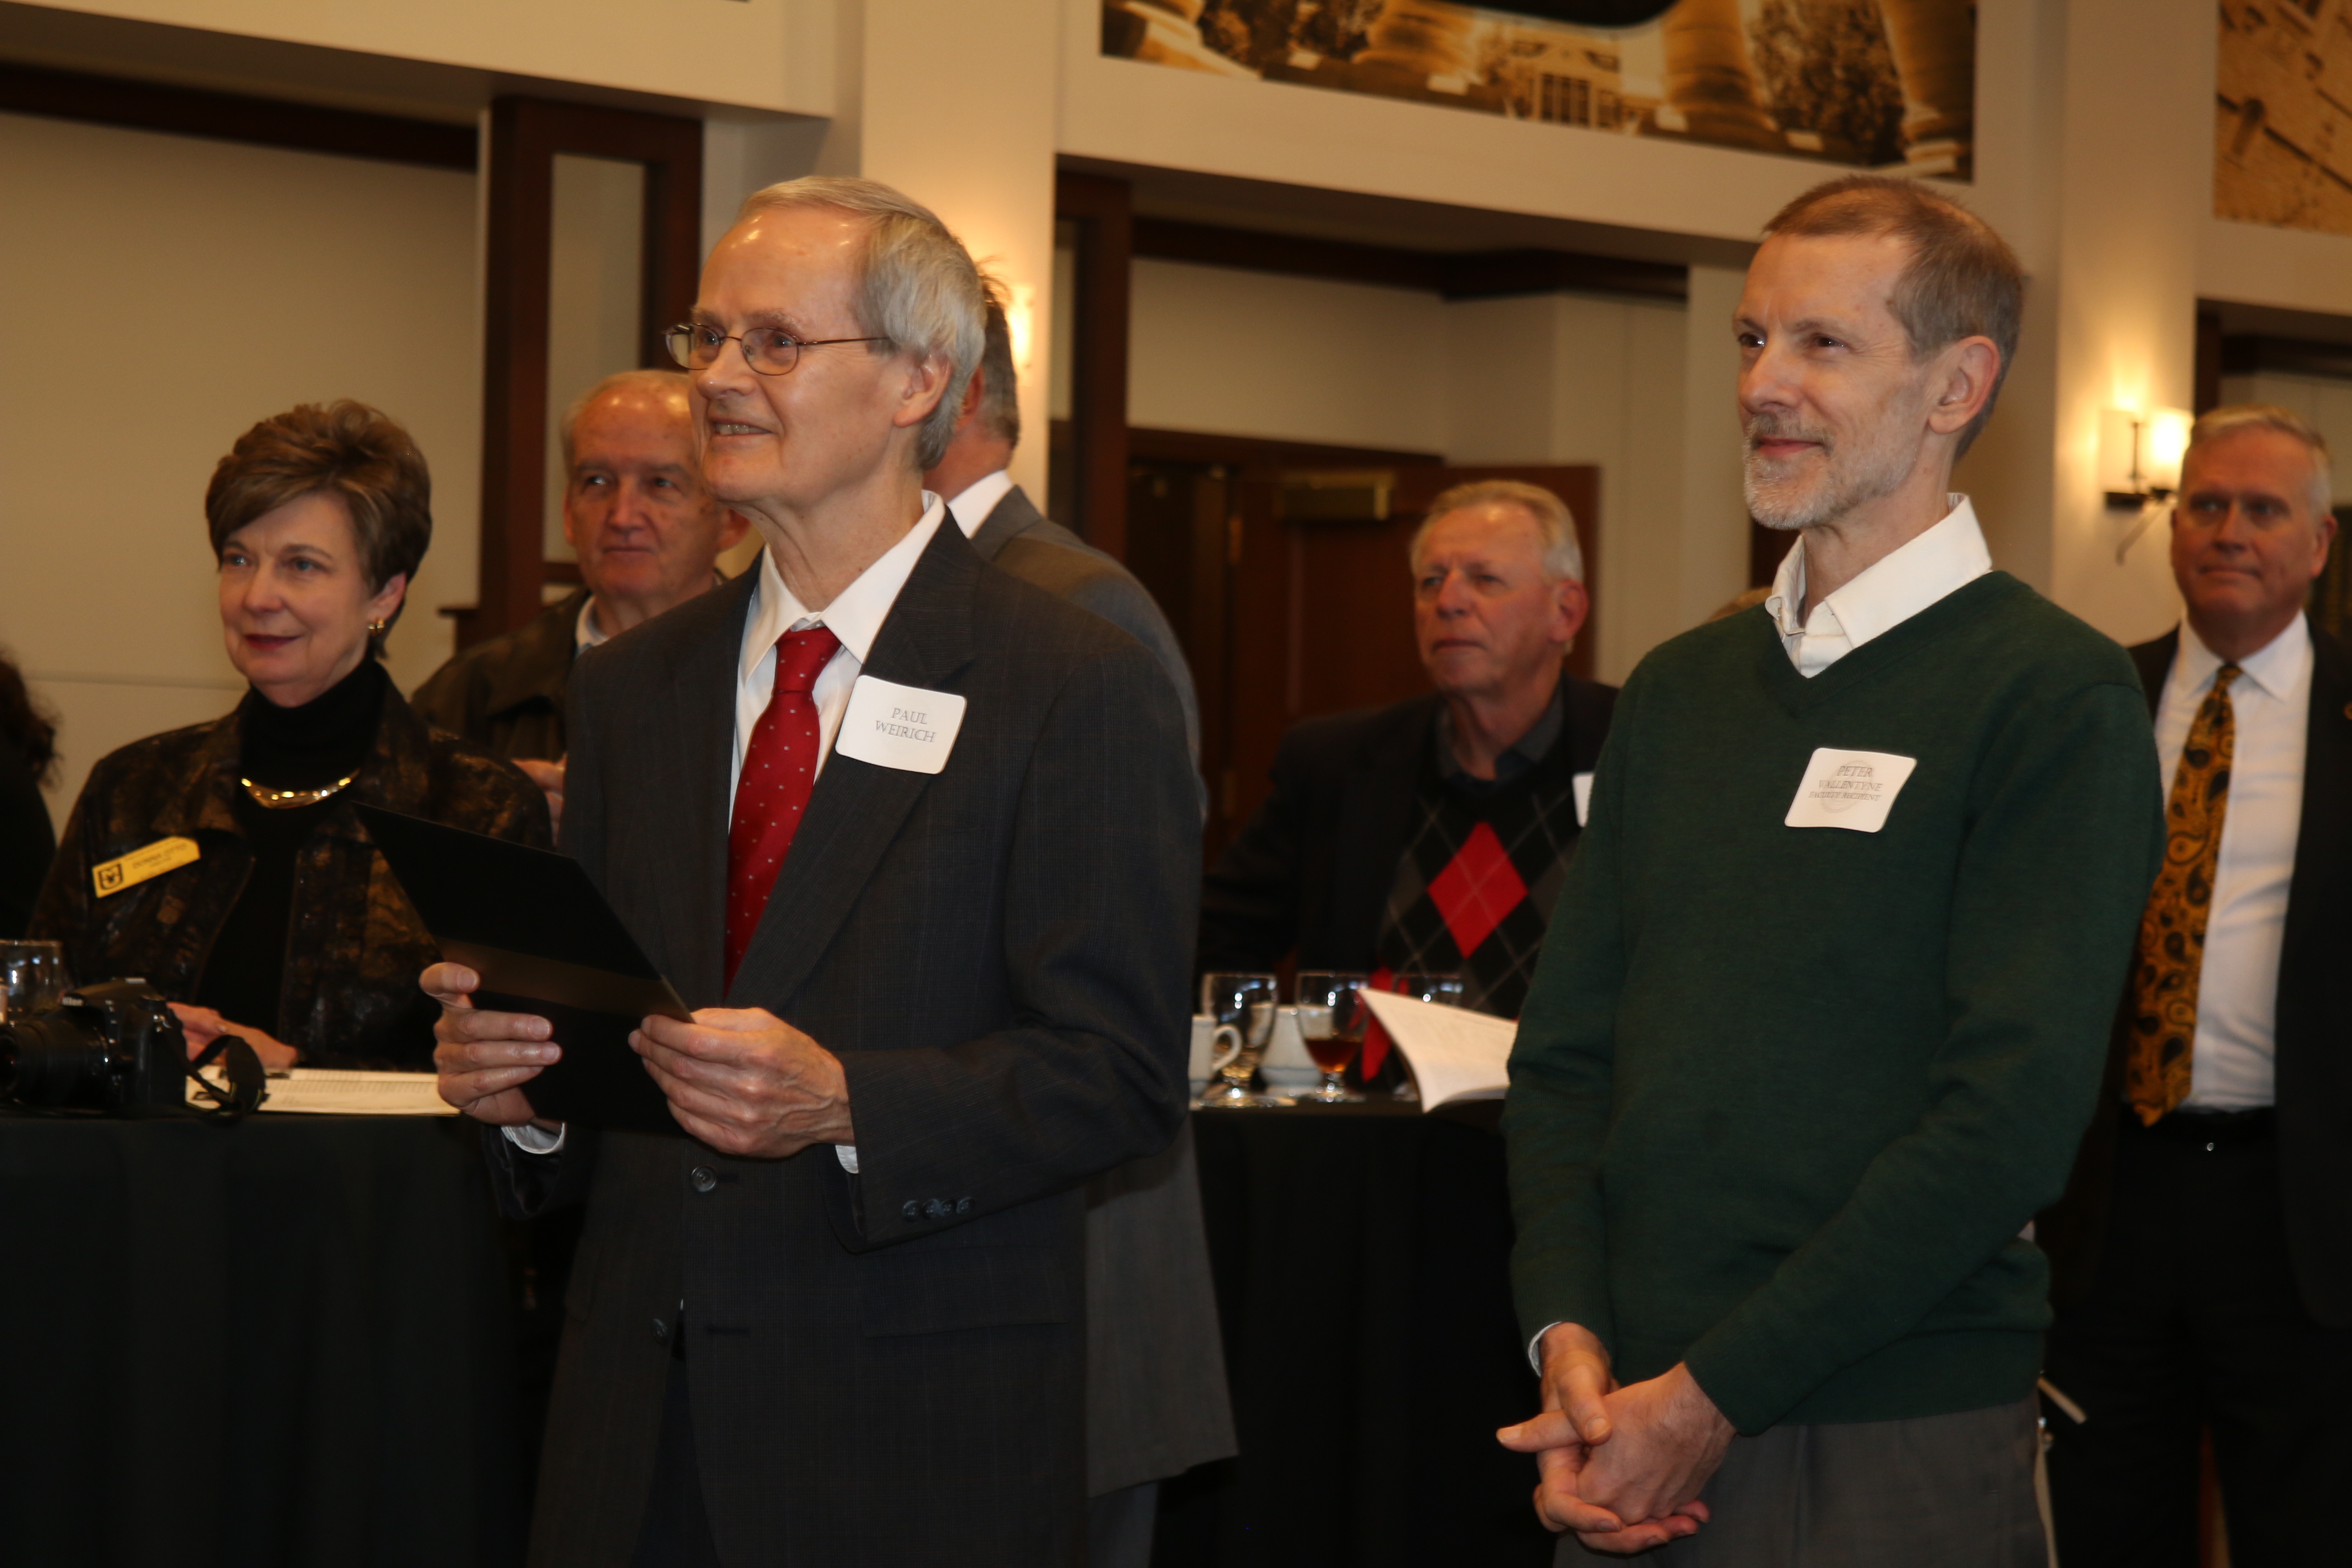 Dr. Peter Vallentyne and Dr. Paul Weirich at the Faculty-Alumni Awards